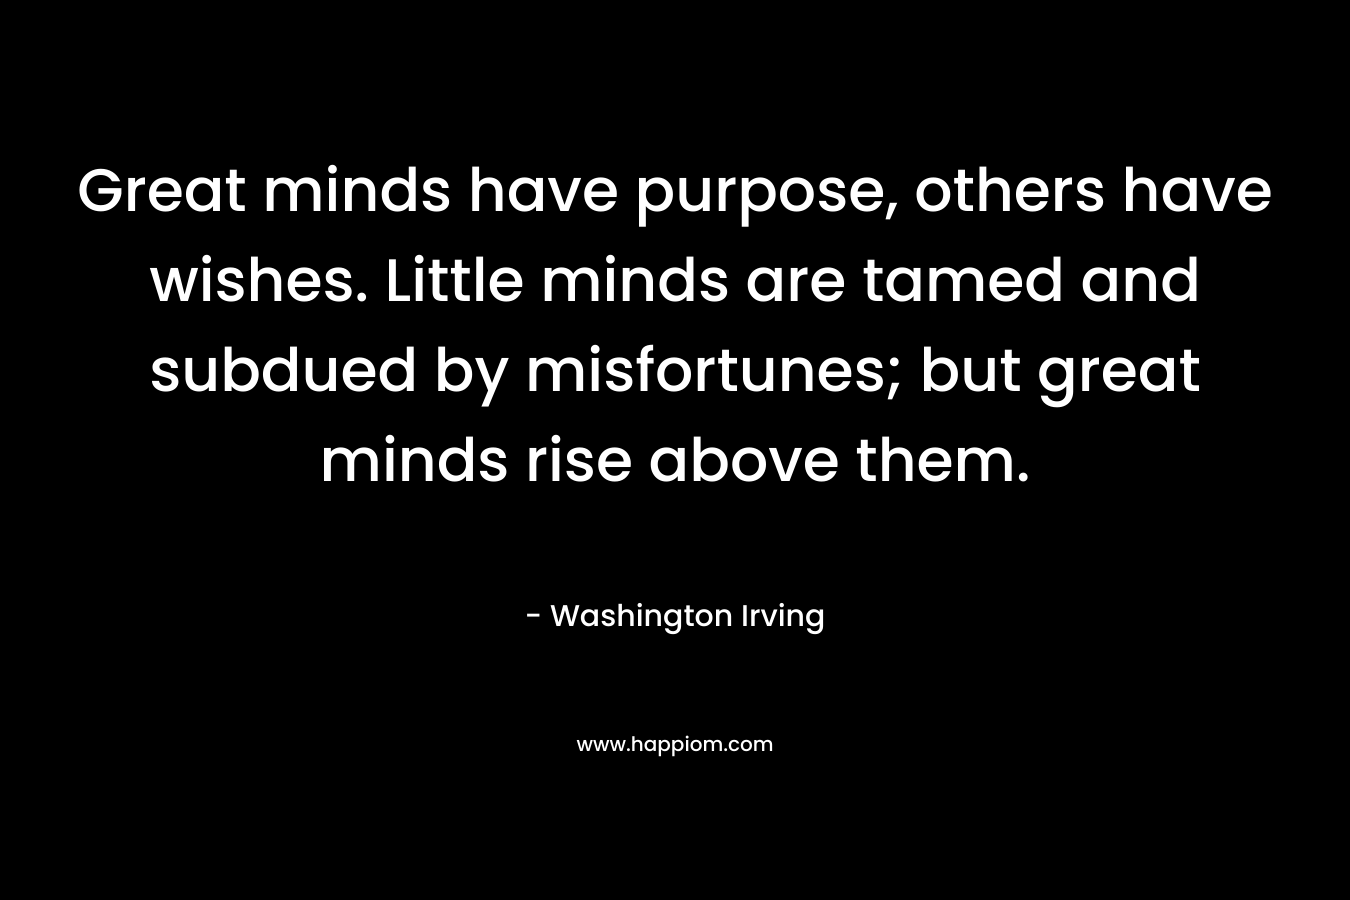 Great minds have purpose, others have wishes. Little minds are tamed and subdued by misfortunes; but great minds rise above them. – Washington Irving